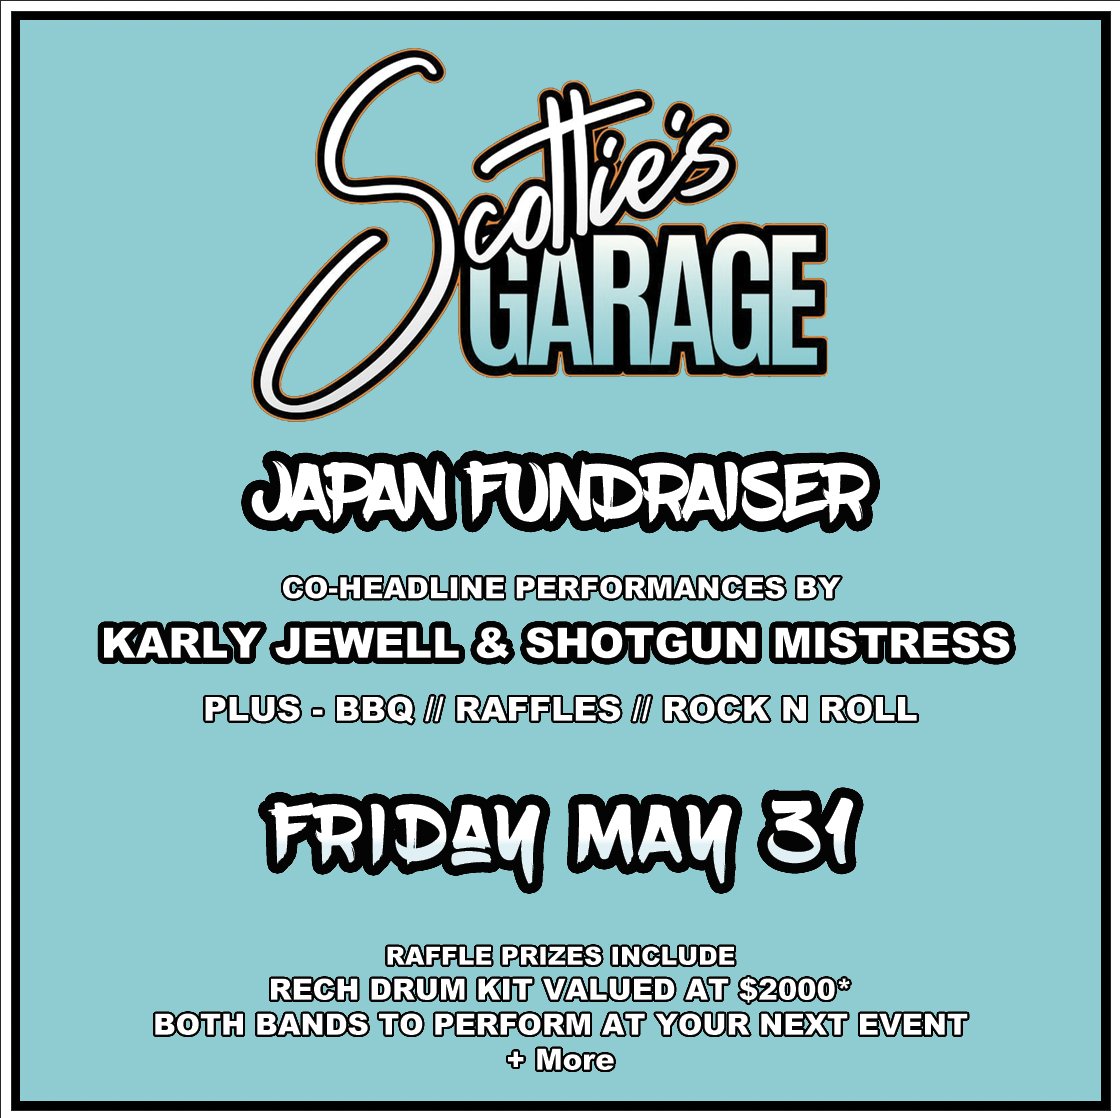 𝕽𝖔𝖈𝖐 𝖓 𝕽𝖔𝖑𝖑 𝕬𝖓𝖓𝖔𝖚𝖓𝖈𝖊𝖒𝖊𝖓𝖙 🇯🇵 JAPAN FUNDRAISER EVENT 🇯🇵 FRIDAY MAY 31 - SCOTTIES GARAGE FRANKSTON : Come down and see us performing with @karlyjewell as the last show before we jet-set off to Japan for 2 weeks.